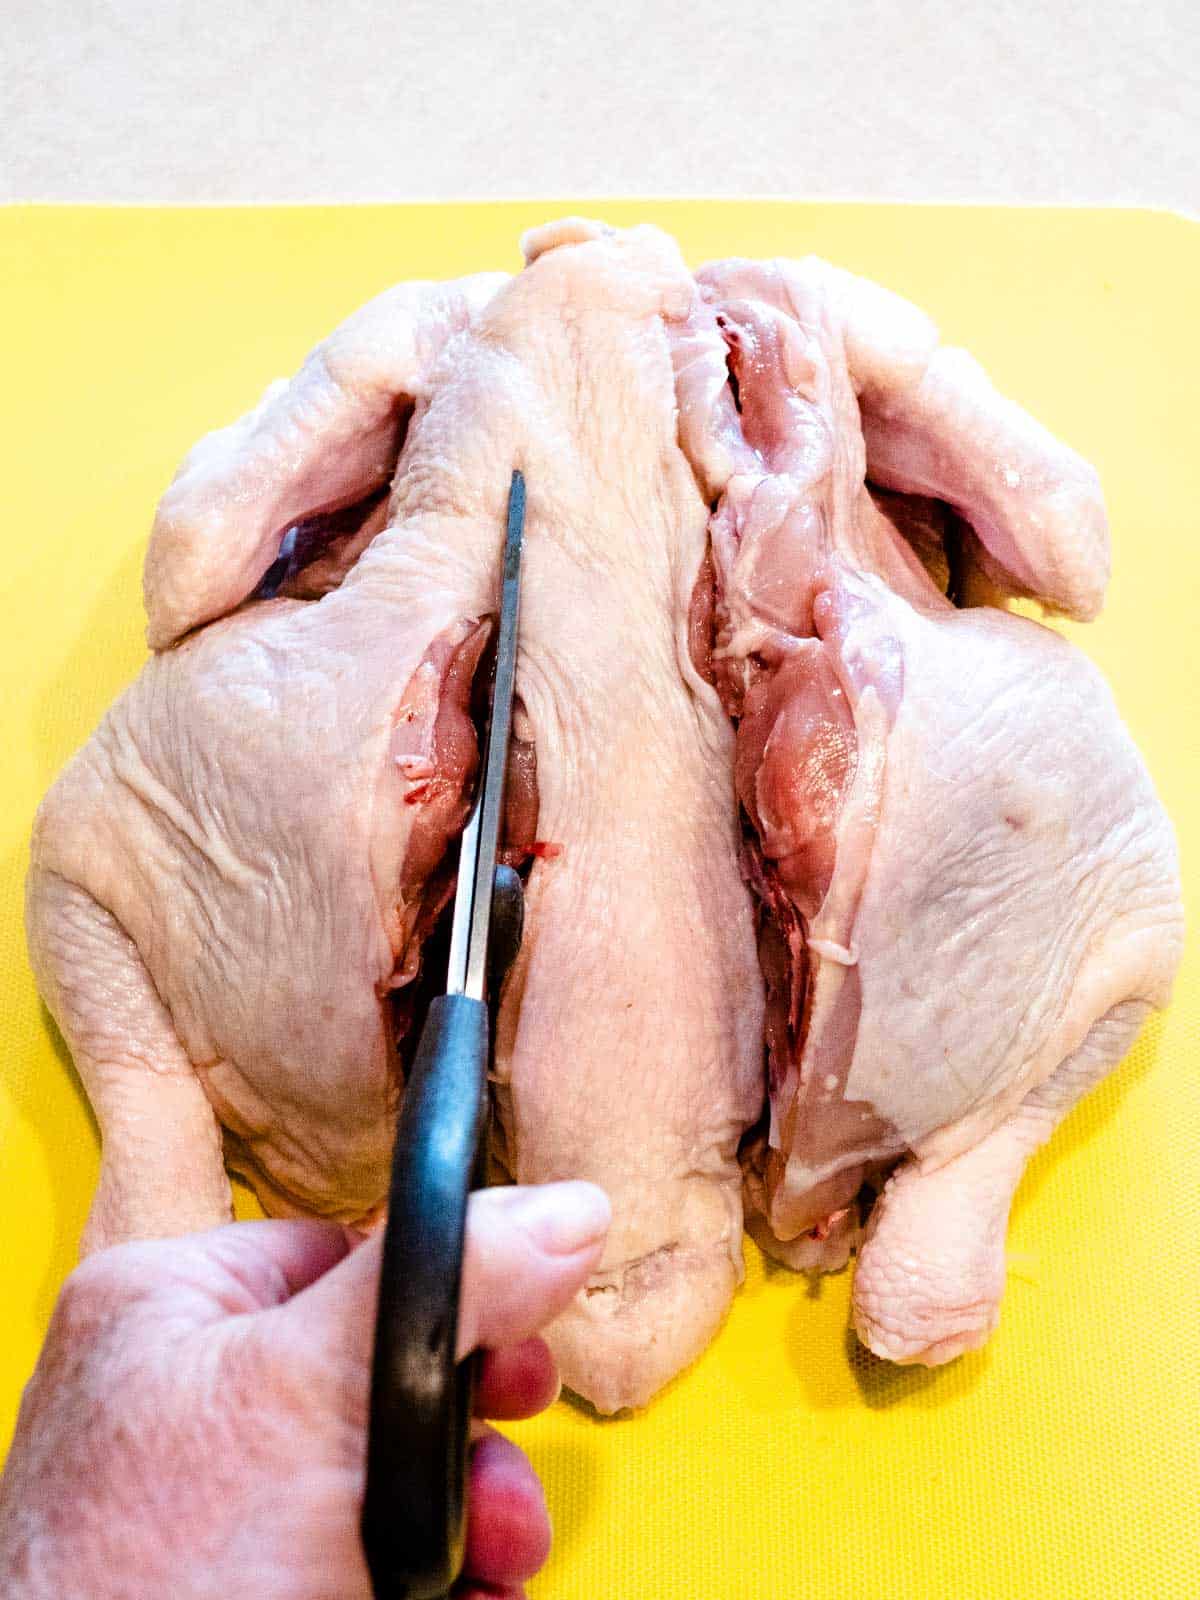 Removing the backbone of the chicken with kitchen shears.